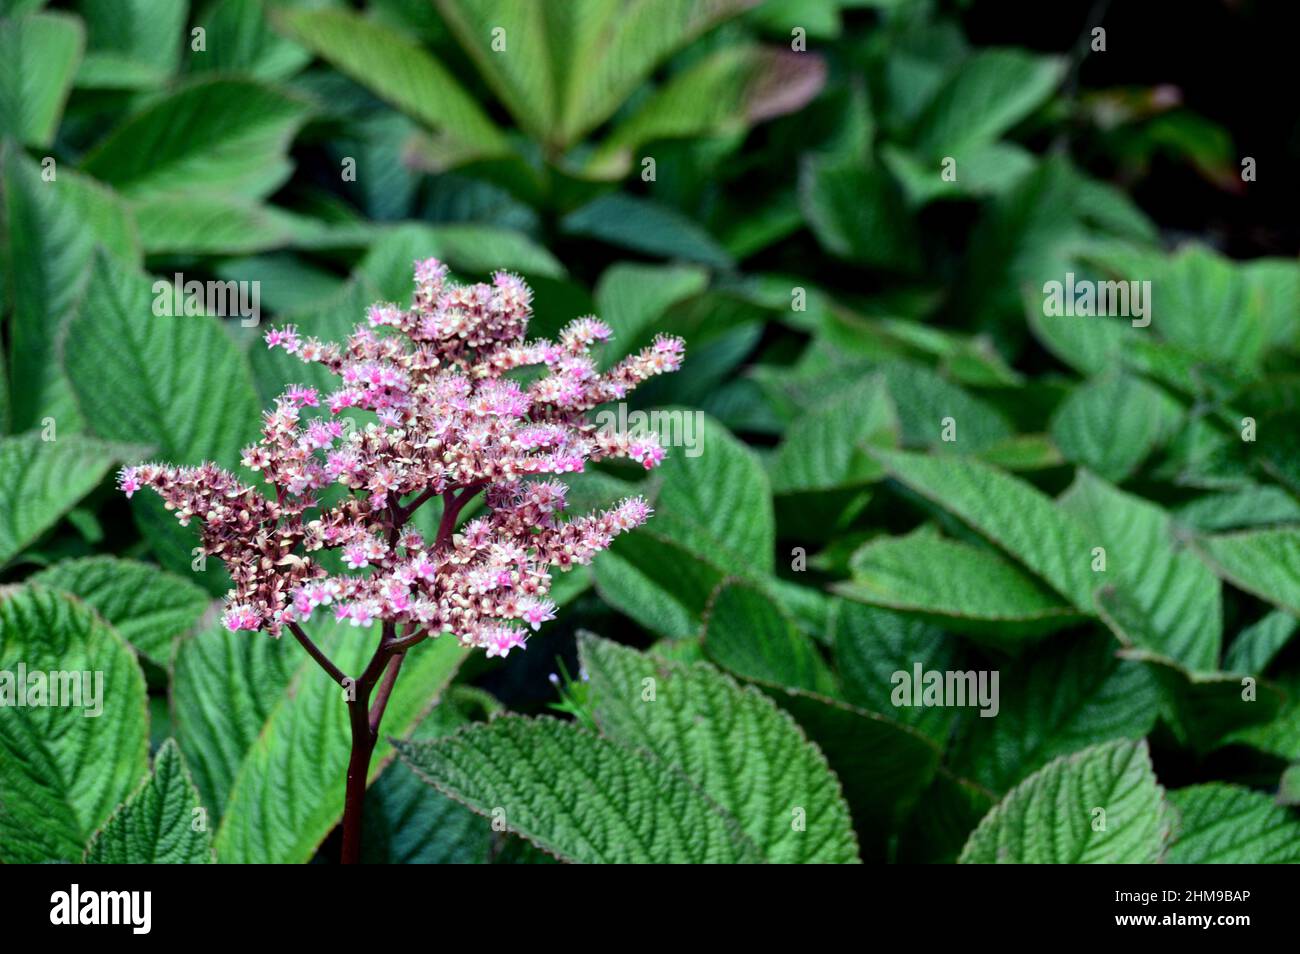 Tiny Pink/White Rodgersia Pinnata 'Chocolate Wing' Star-shaped  Flowers grown in the Borders at RHS Garden Harlow Carr, Harrogate, Yorkshire, UK. Stock Photo